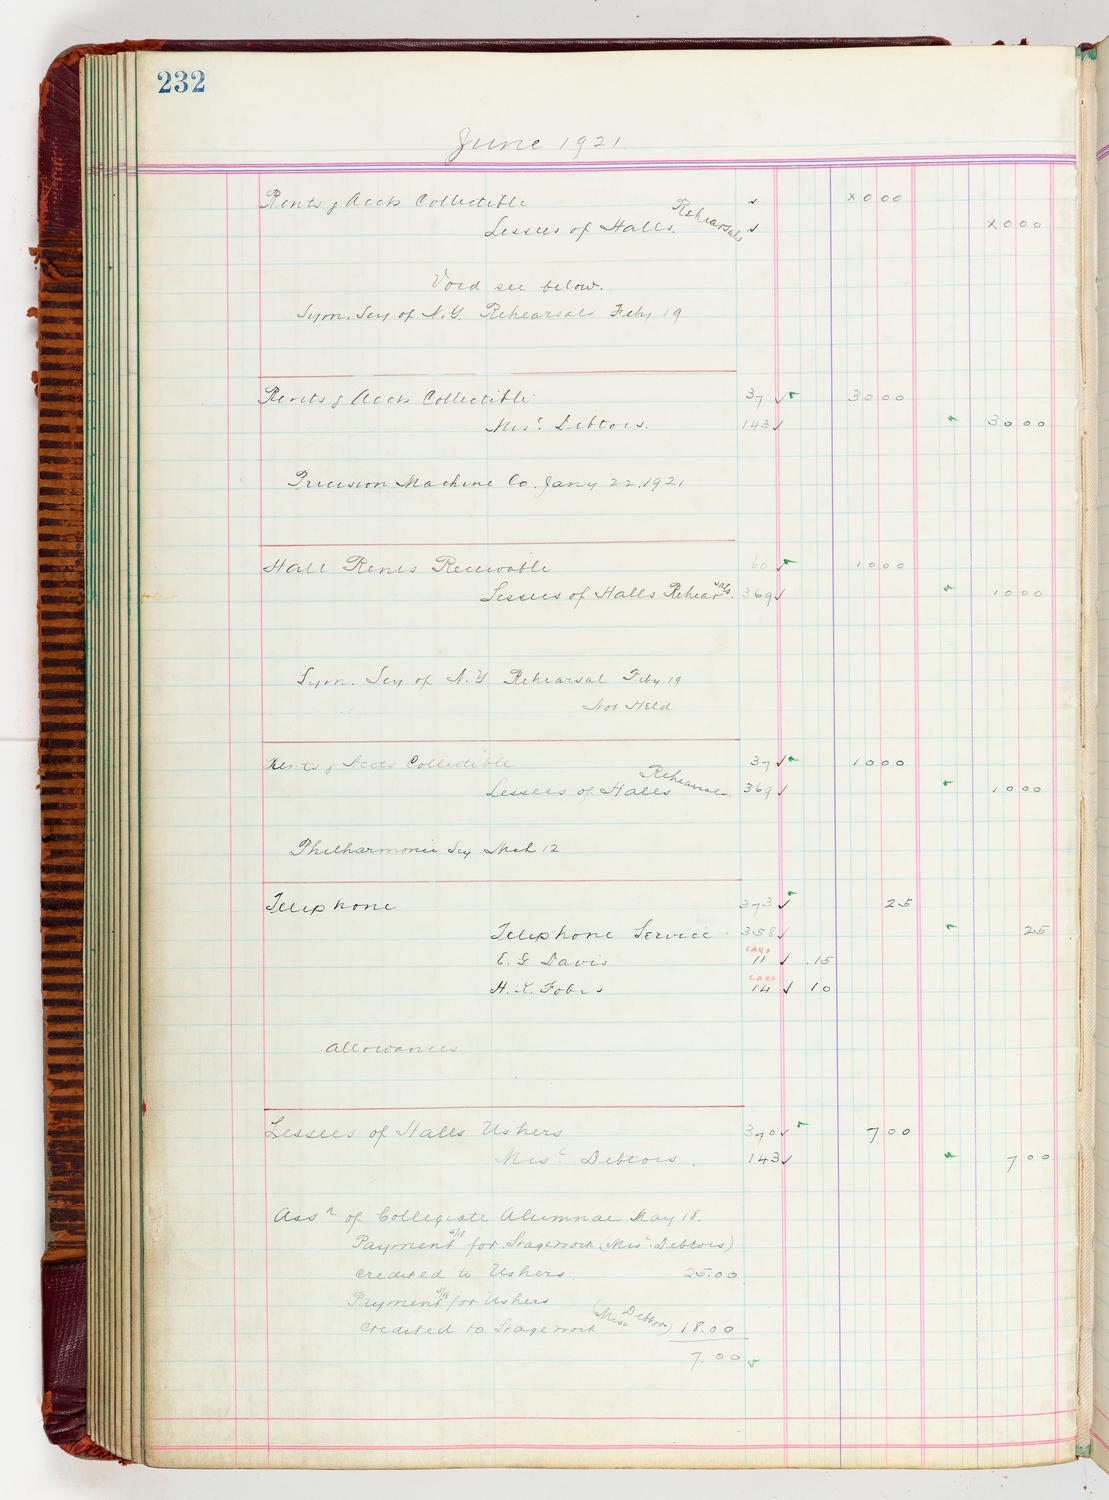 Music Hall Accounting Ledger, volume 5, page 232